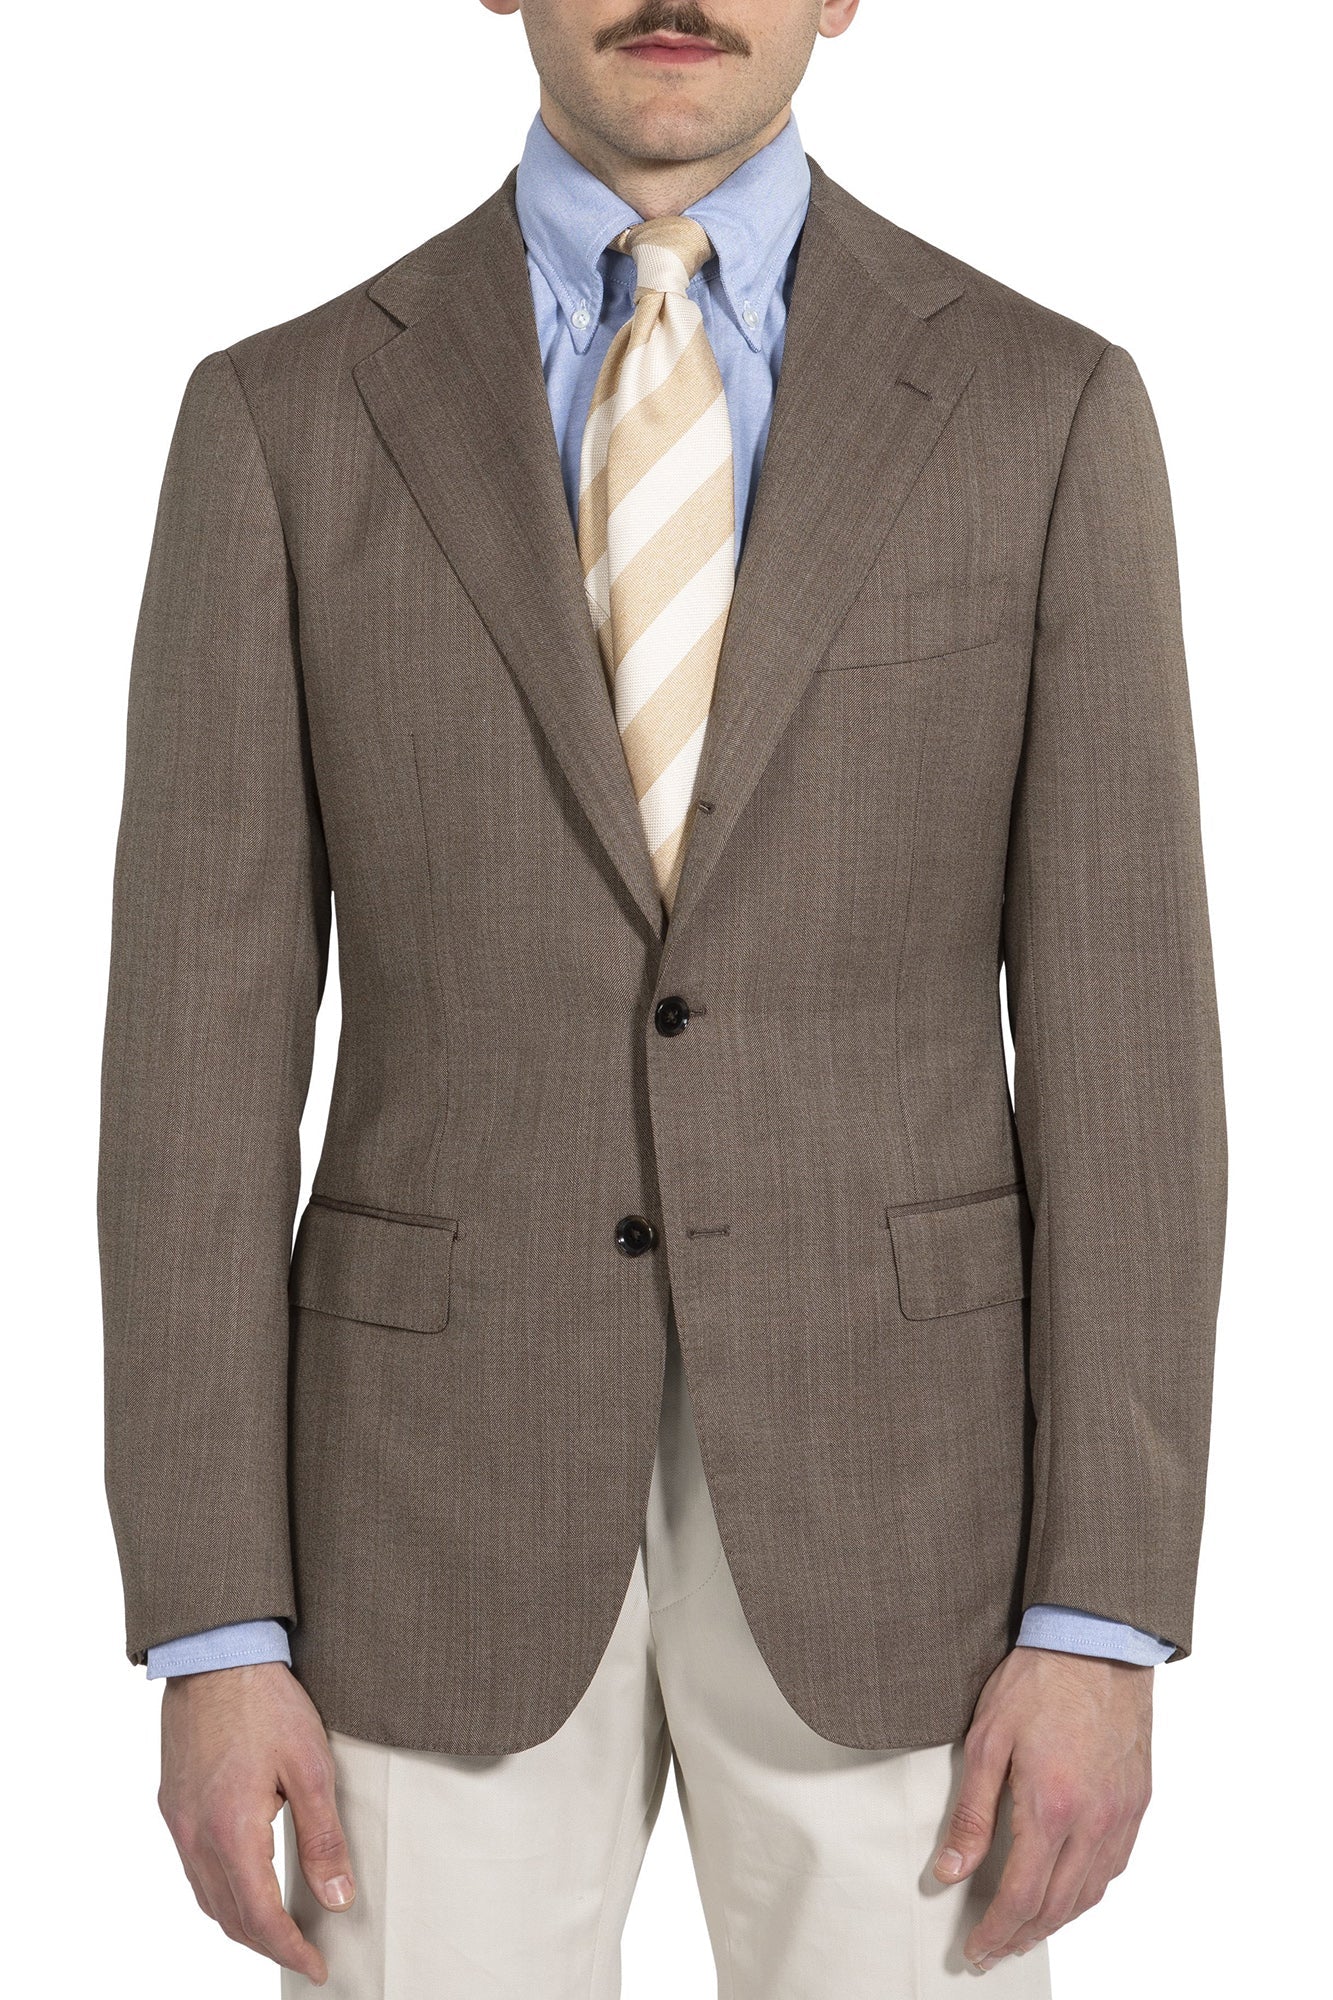 The Armoury by Ring Jacket Model 3 Mid Brown Wool Herringbone Sport Coat with Flap Pocket